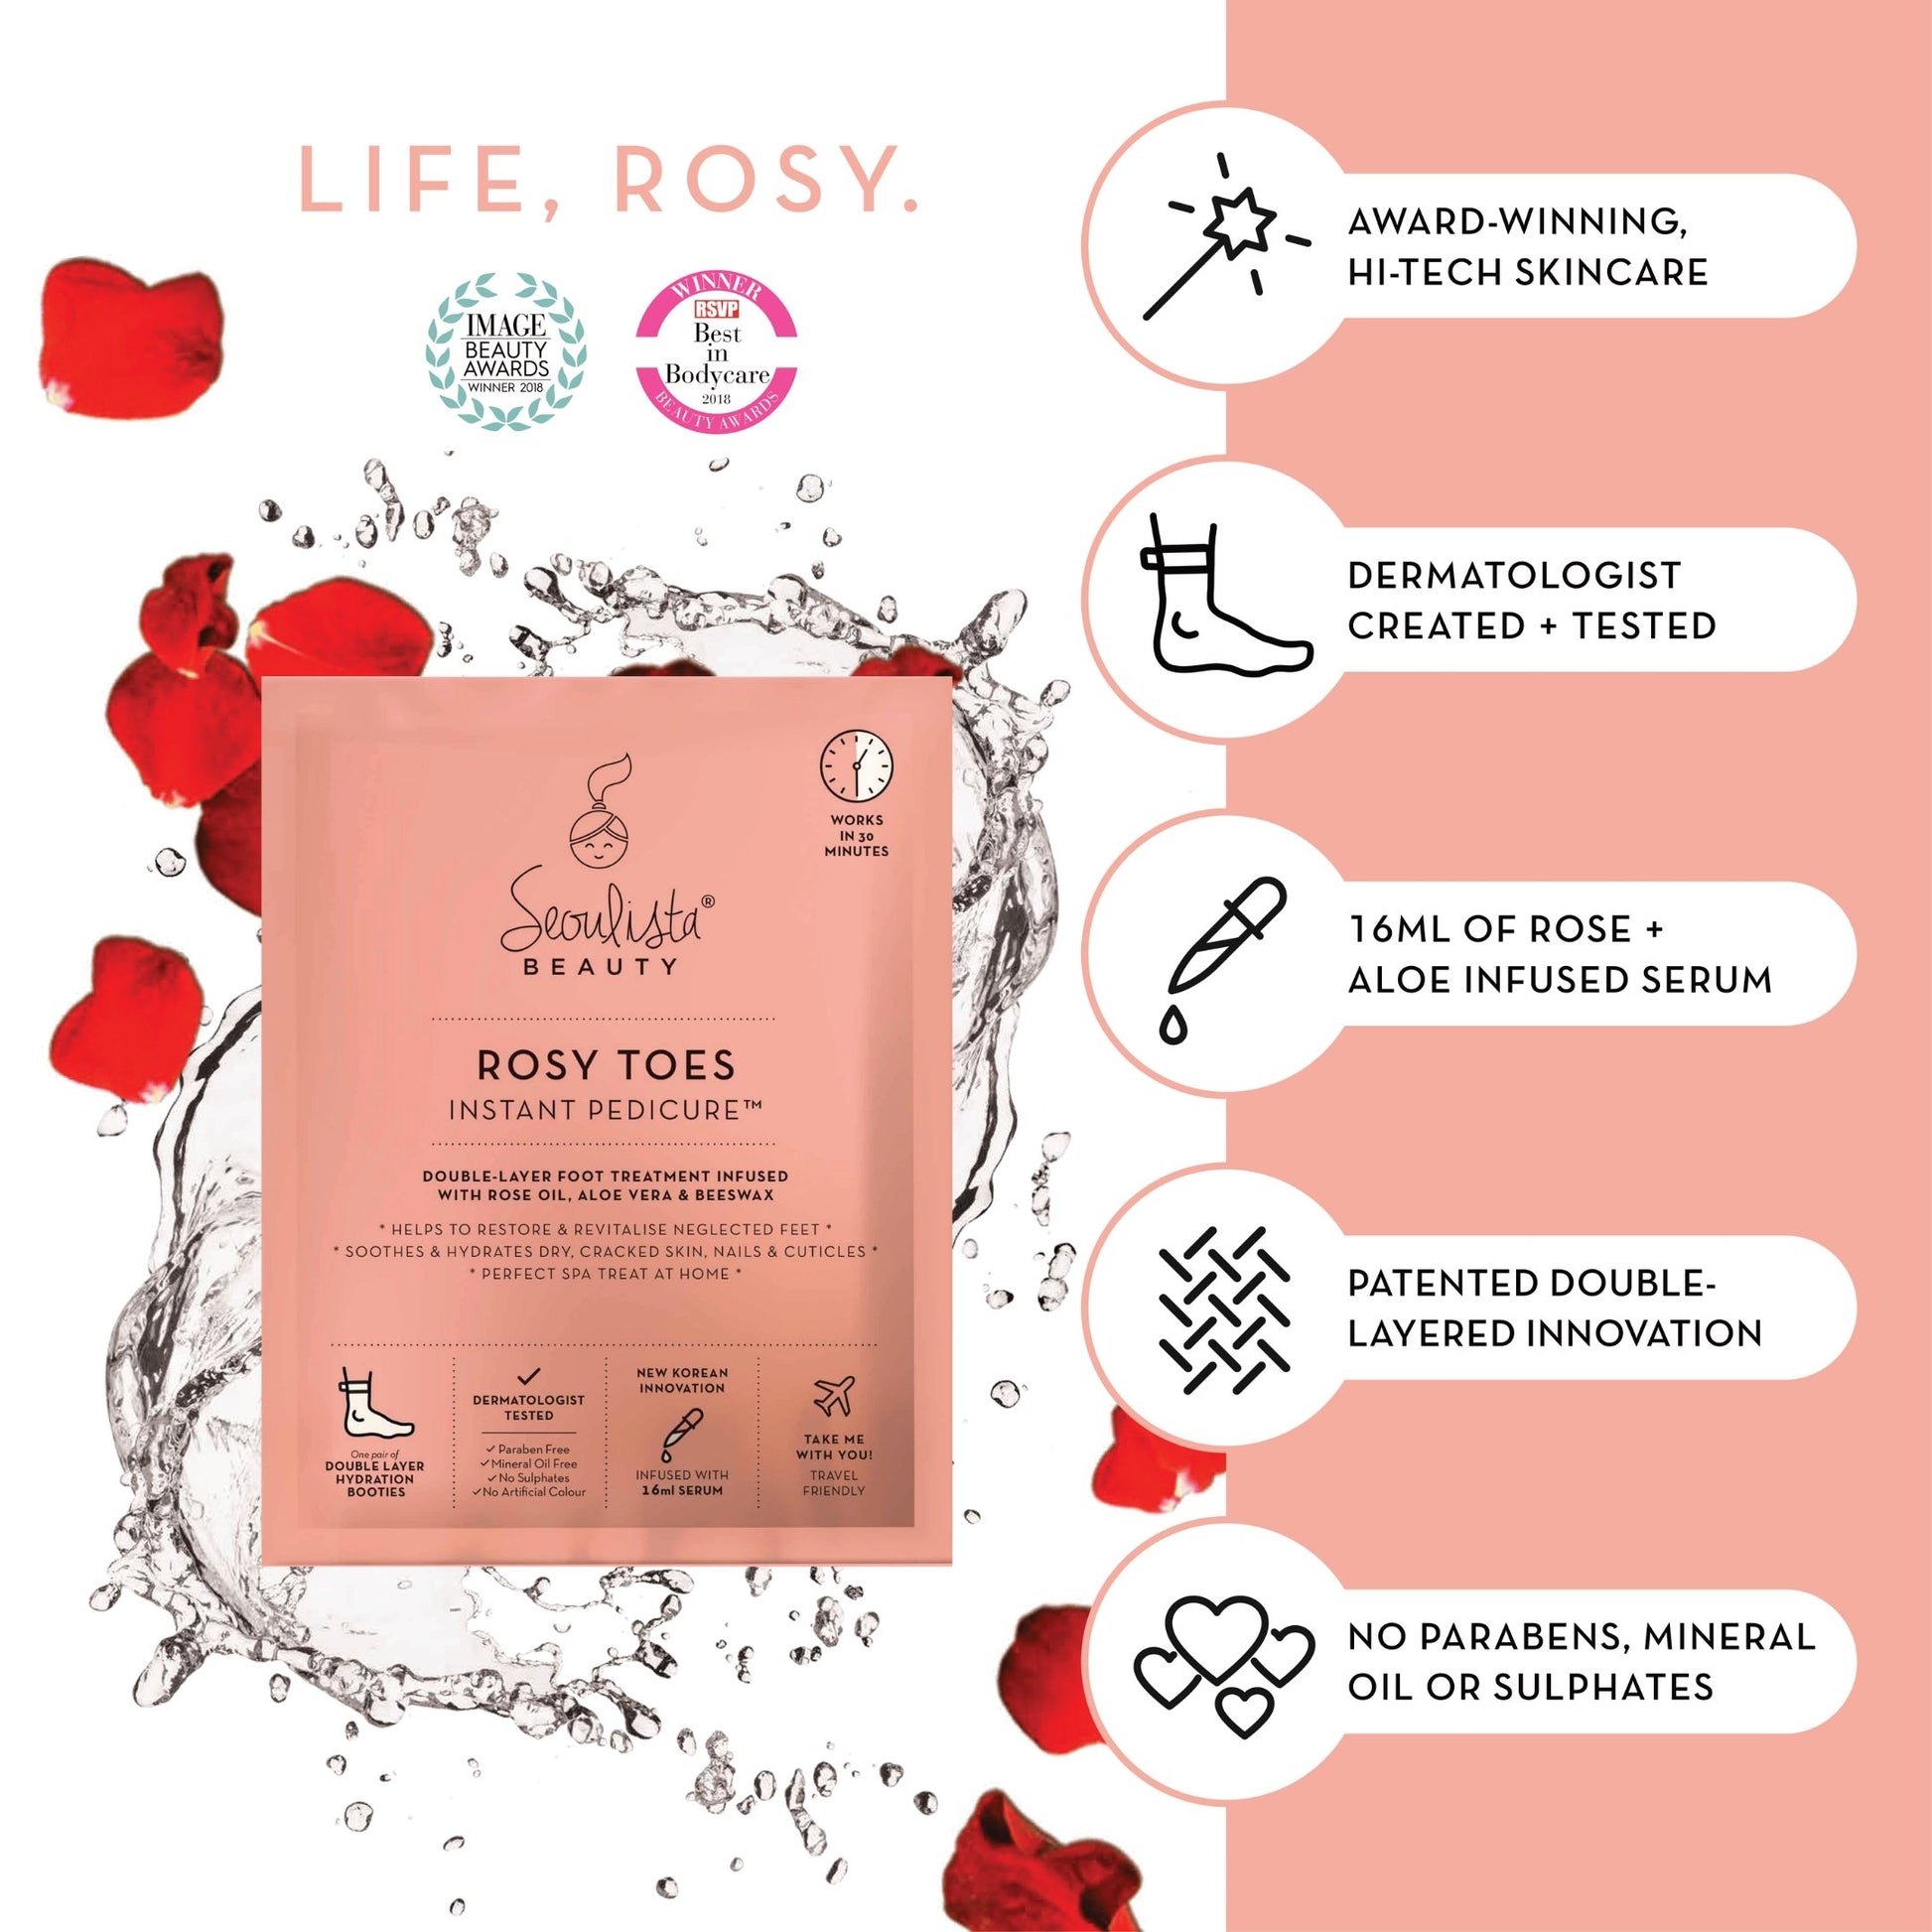 Seoulista Rosy Toes® Instant Pedicure - Seoulista Beauty